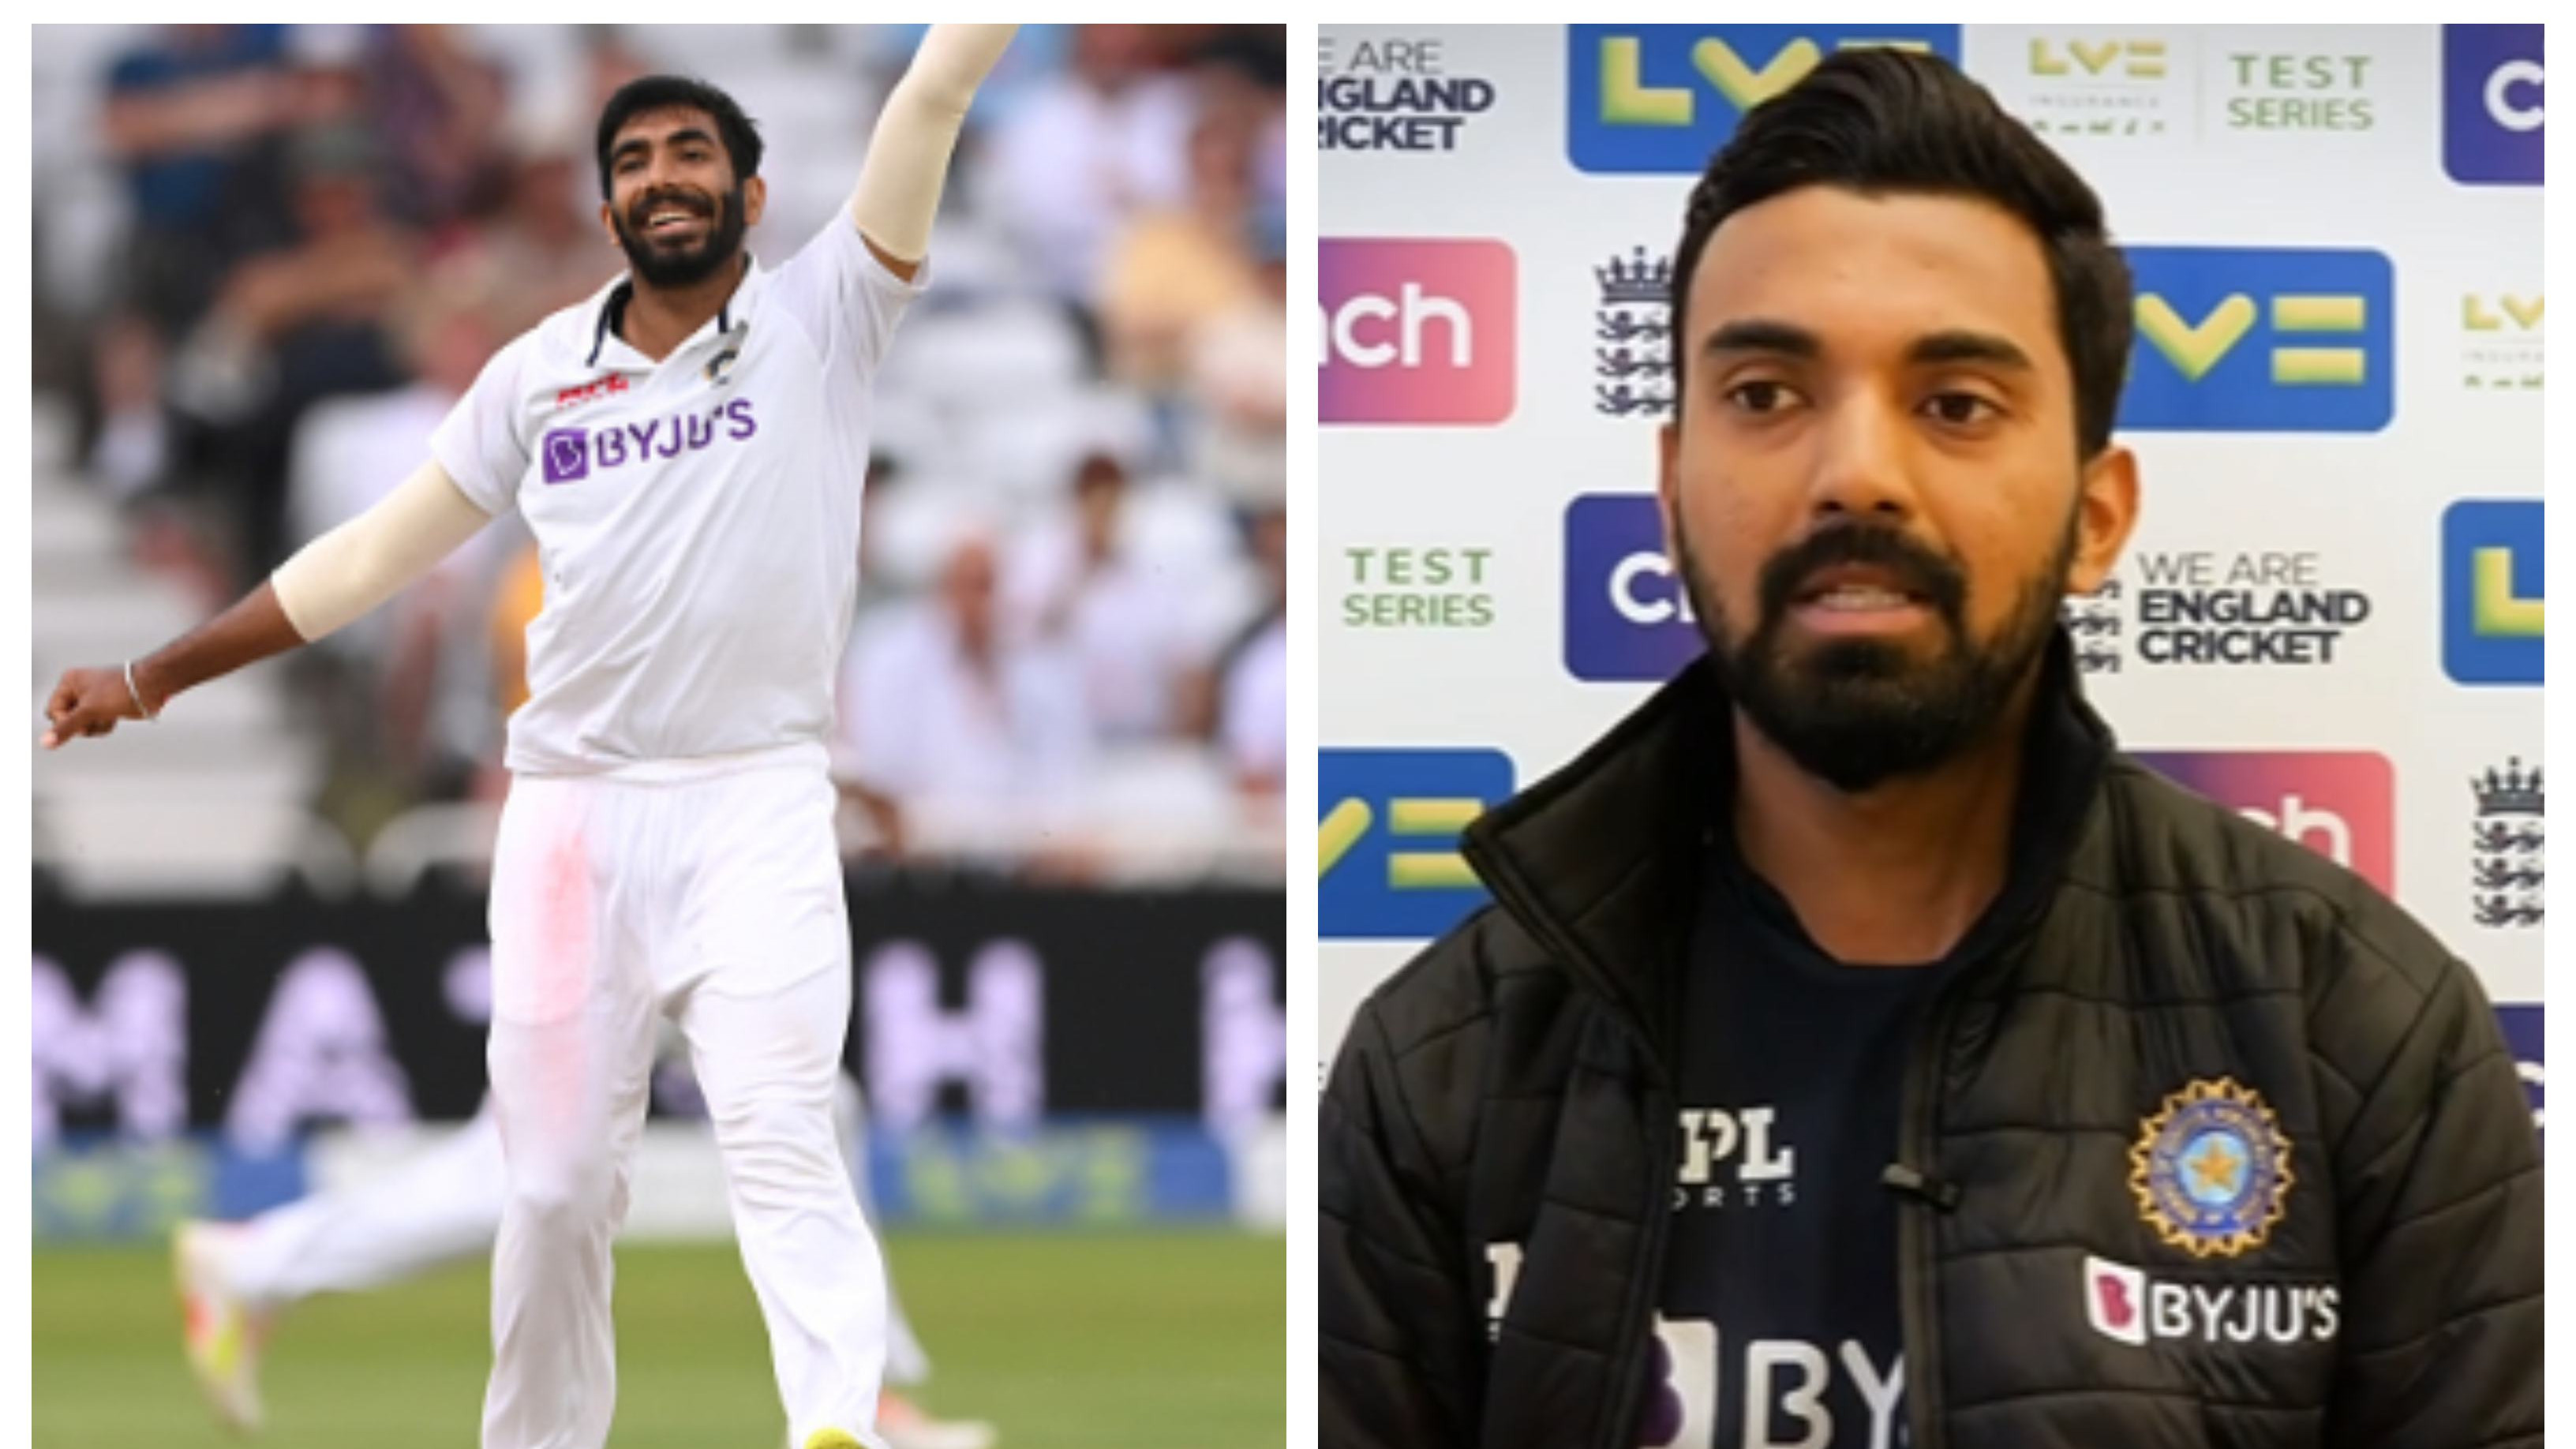 ENG v IND 2021: KL Rahul expresses surprise over Bumrah’s return to form question; says he is our No.1 bowler